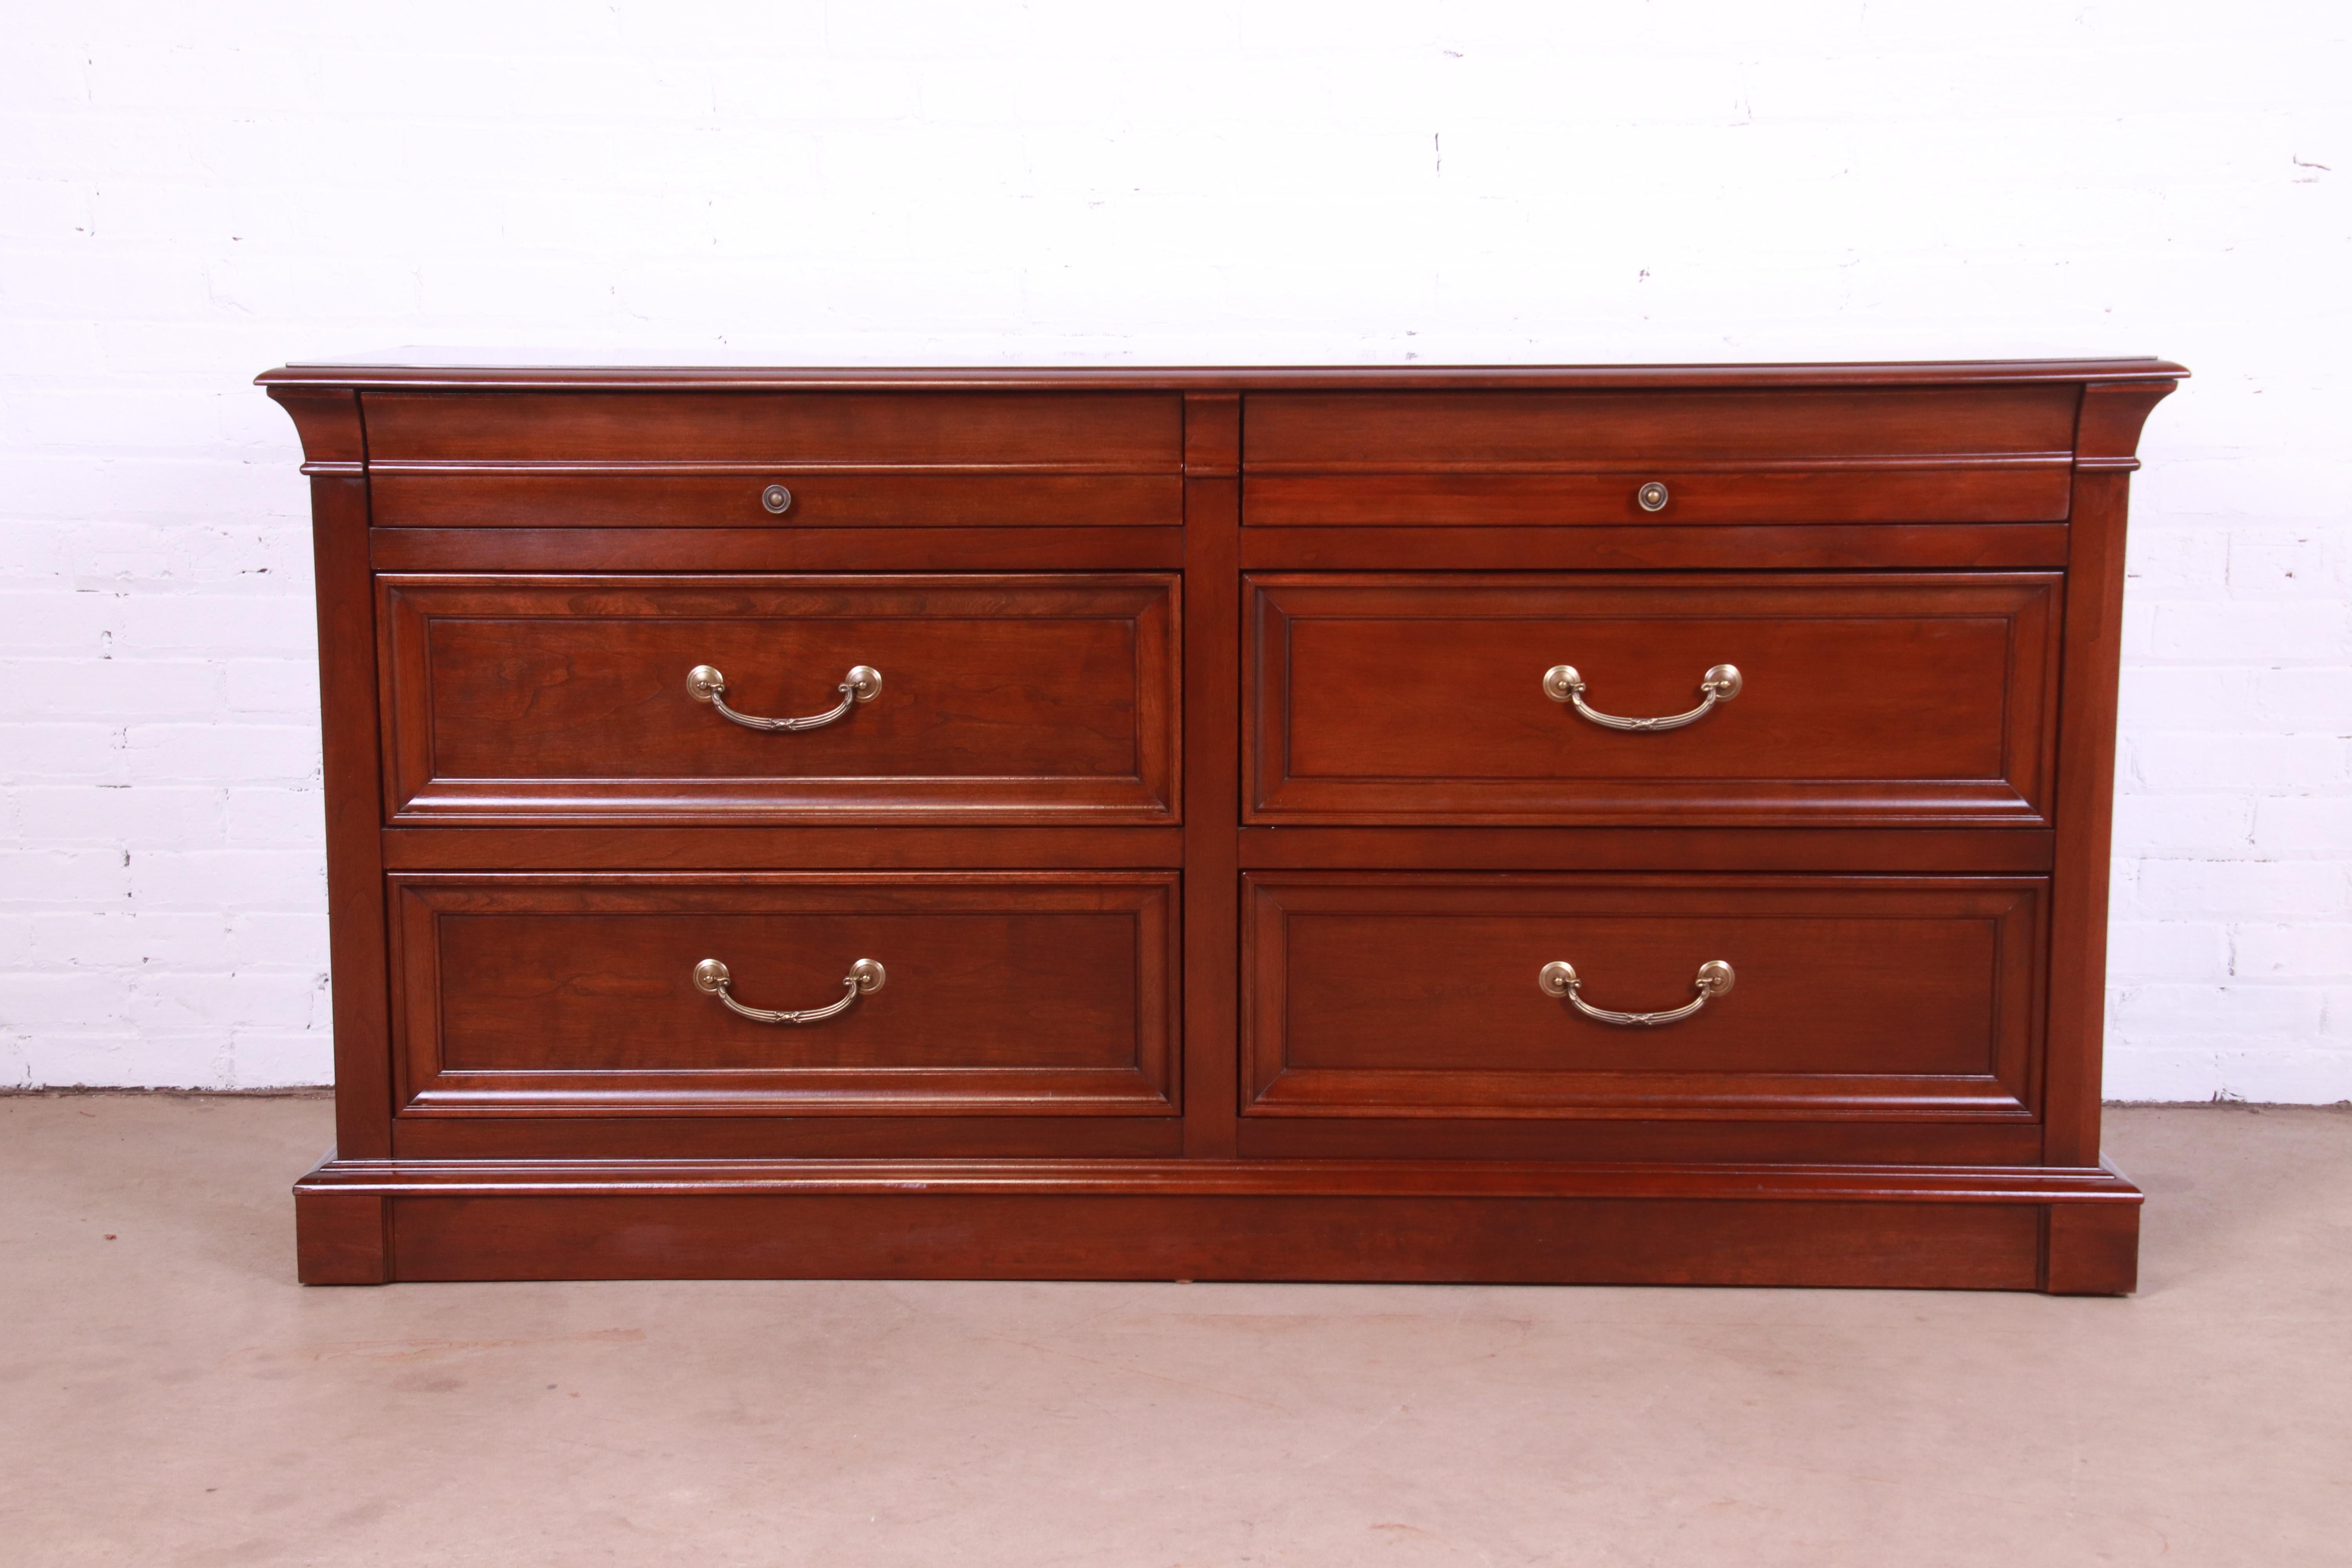 A gorgeous Georgian or Regency style six-drawer dresser or credenza

By Ethan Allen

USA, Circa 1990s

Cherry wood, with original brass hardware.

Measures: 64